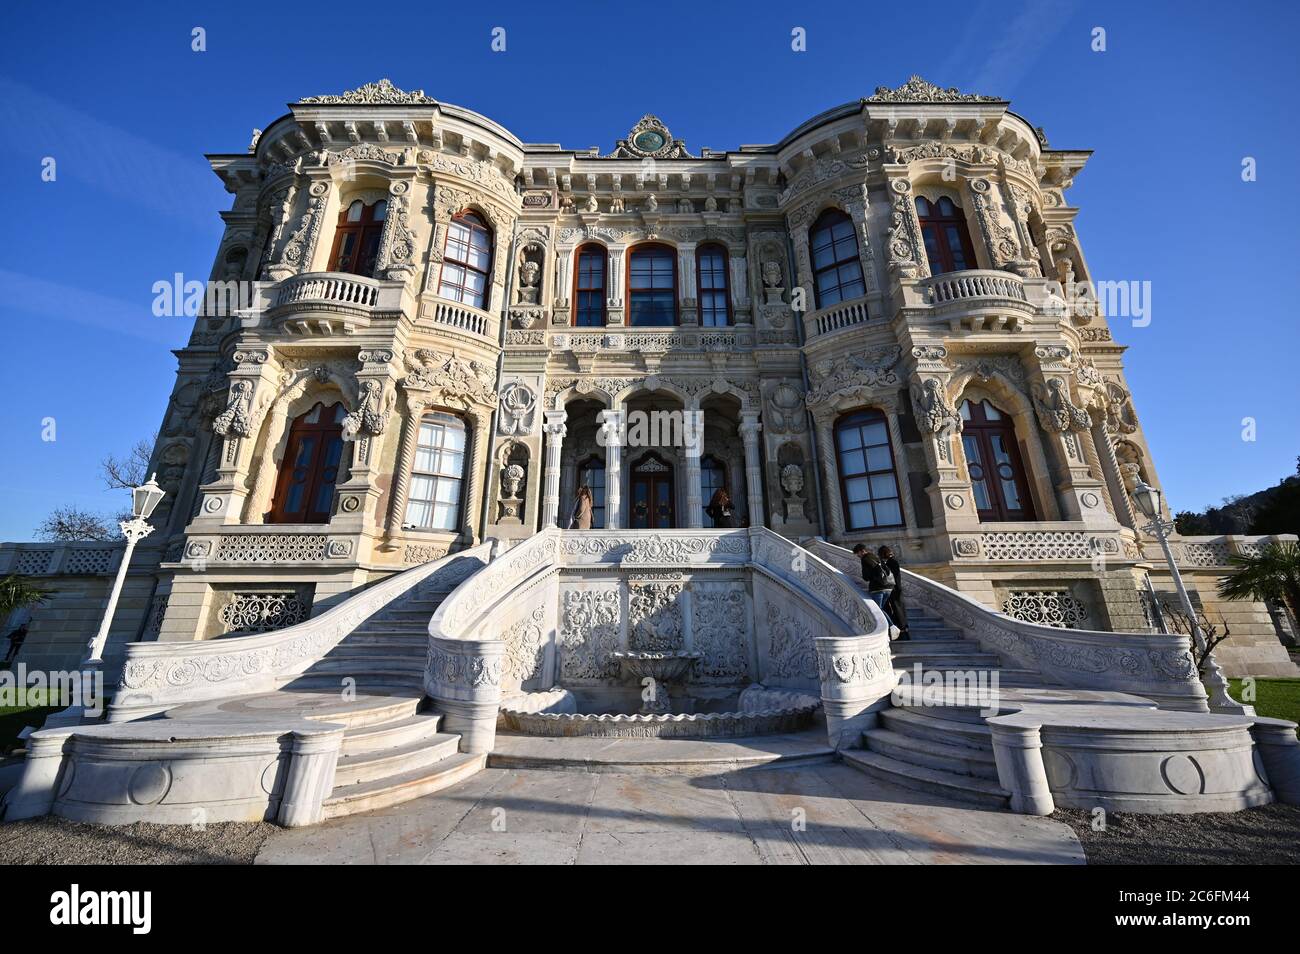 Contemporary Buildings Kucuksu Pavilion which is a 19th century Ottoman Empire era summer and hunting palace in Bosphorus. Stock Photo